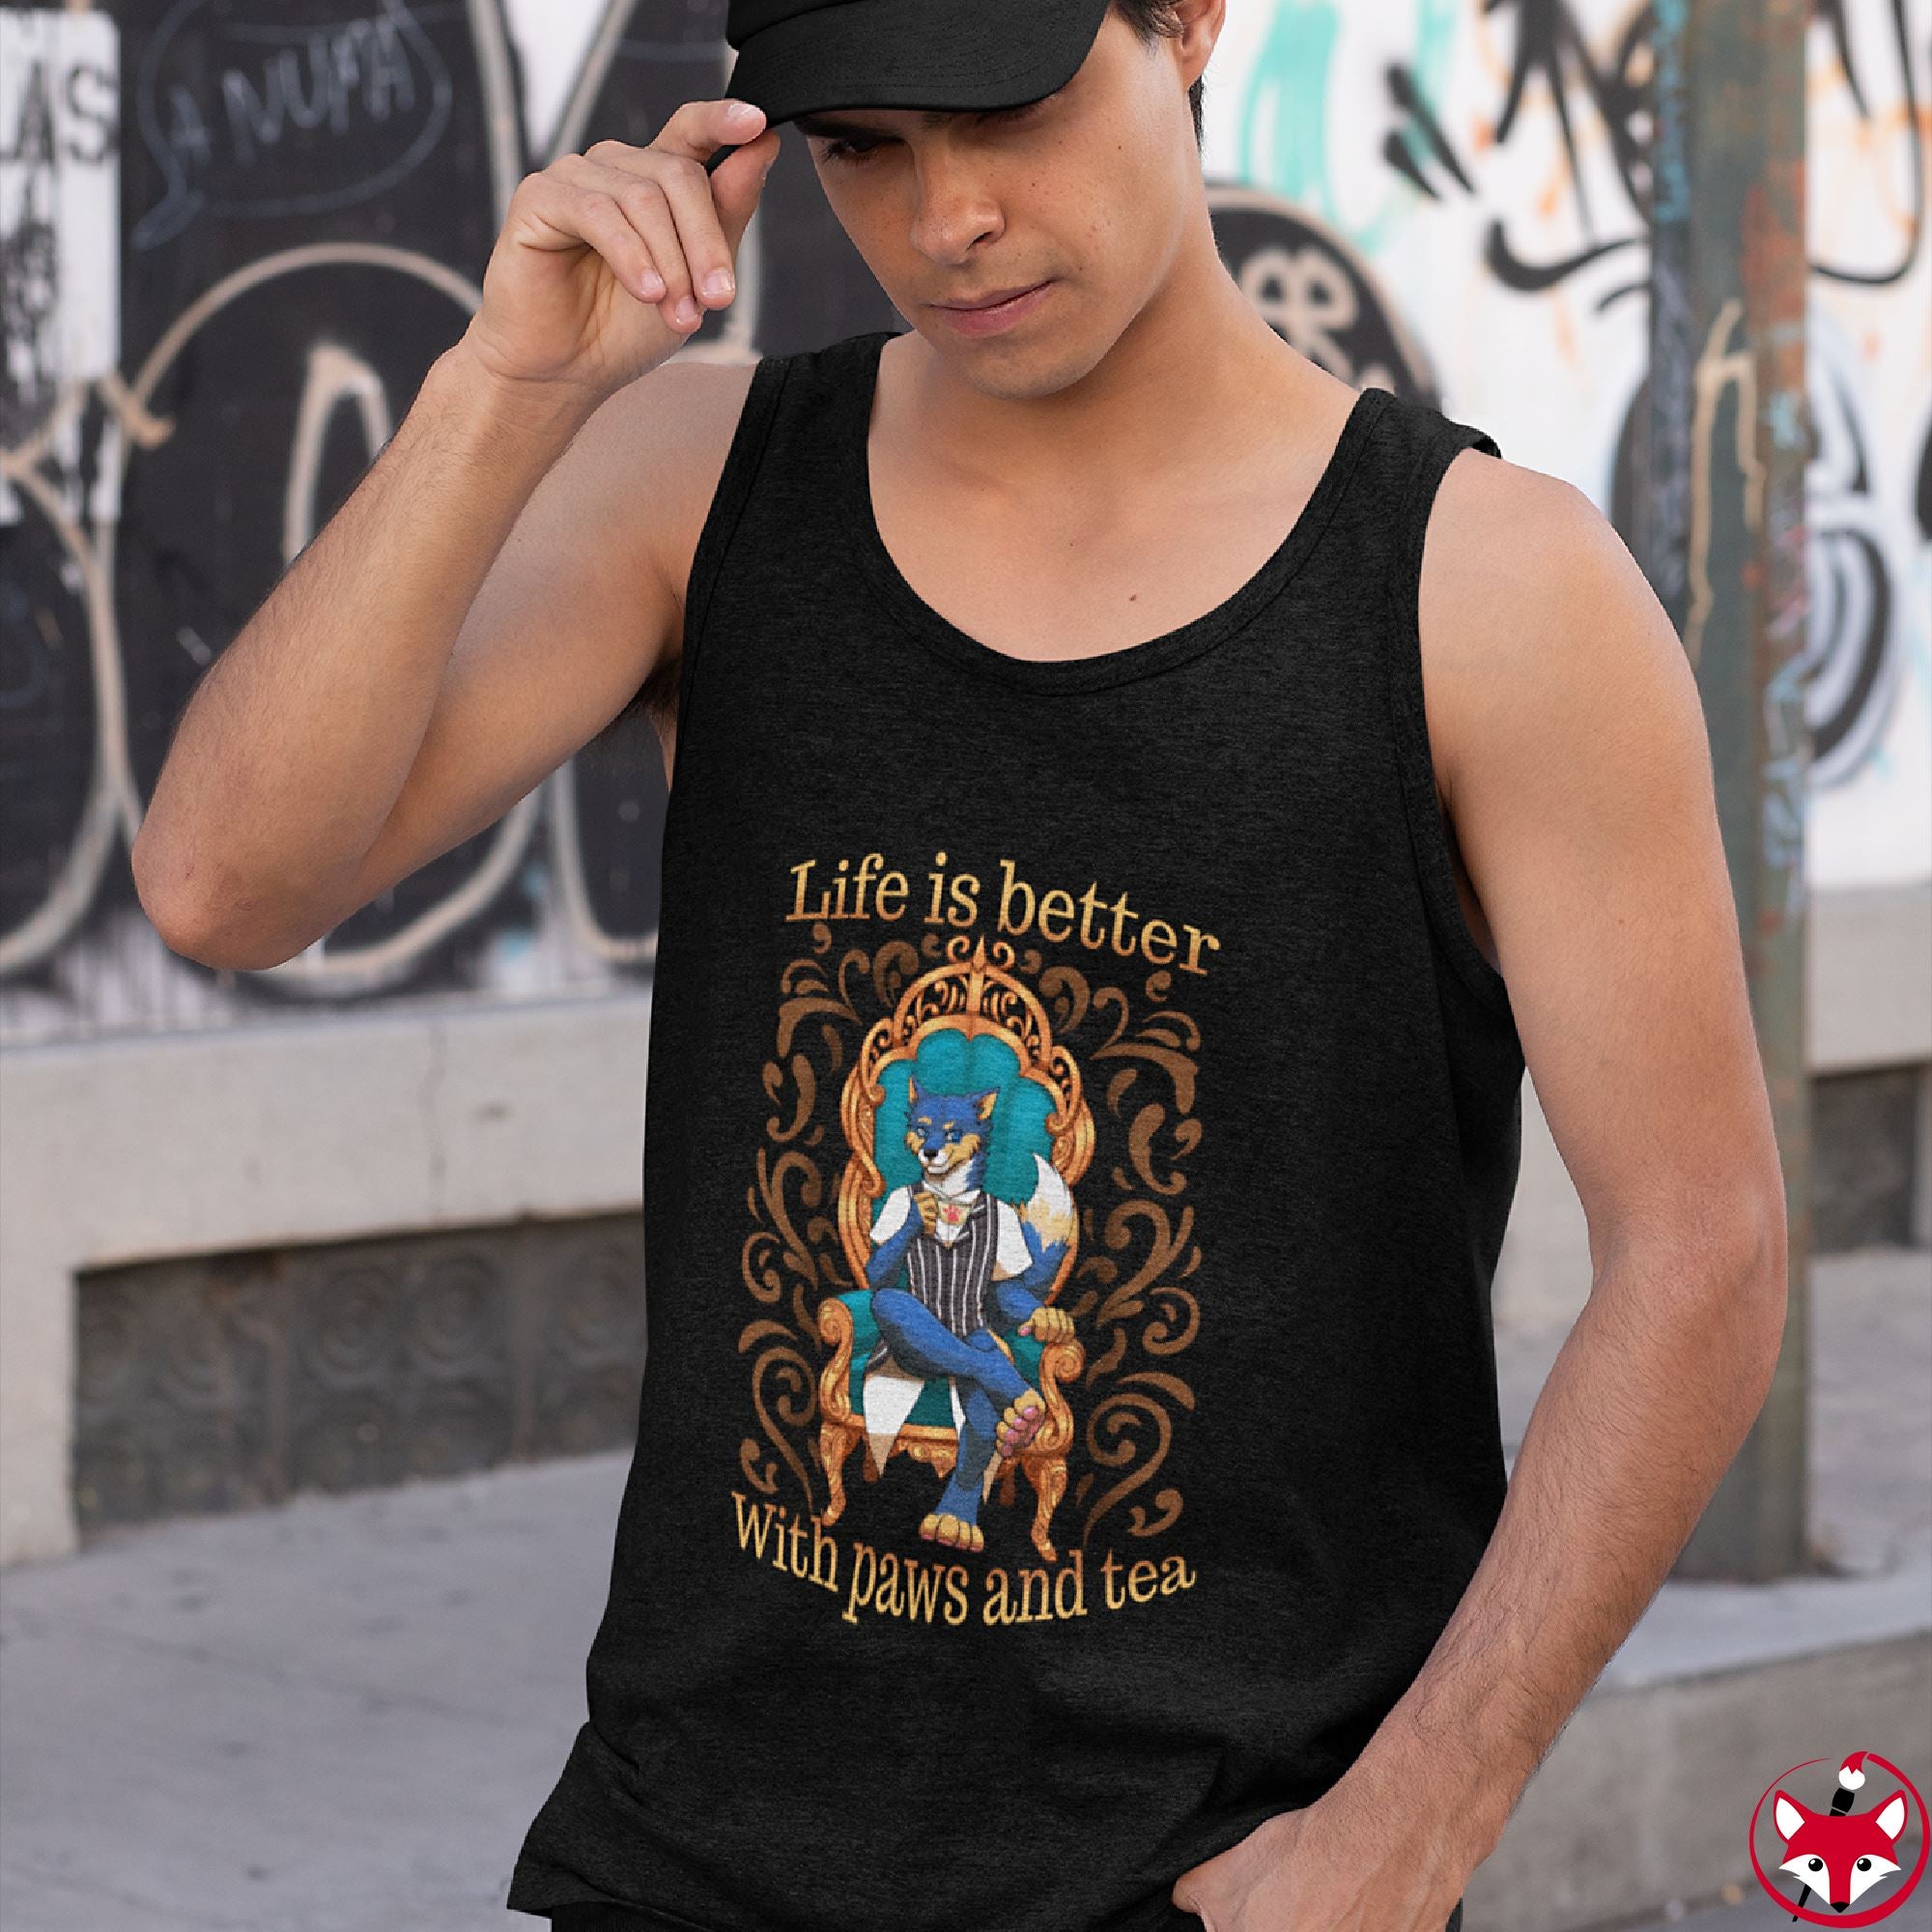 Life is better with Paws and Tea - Tank Top Tank Top Artemis Wishfoot 